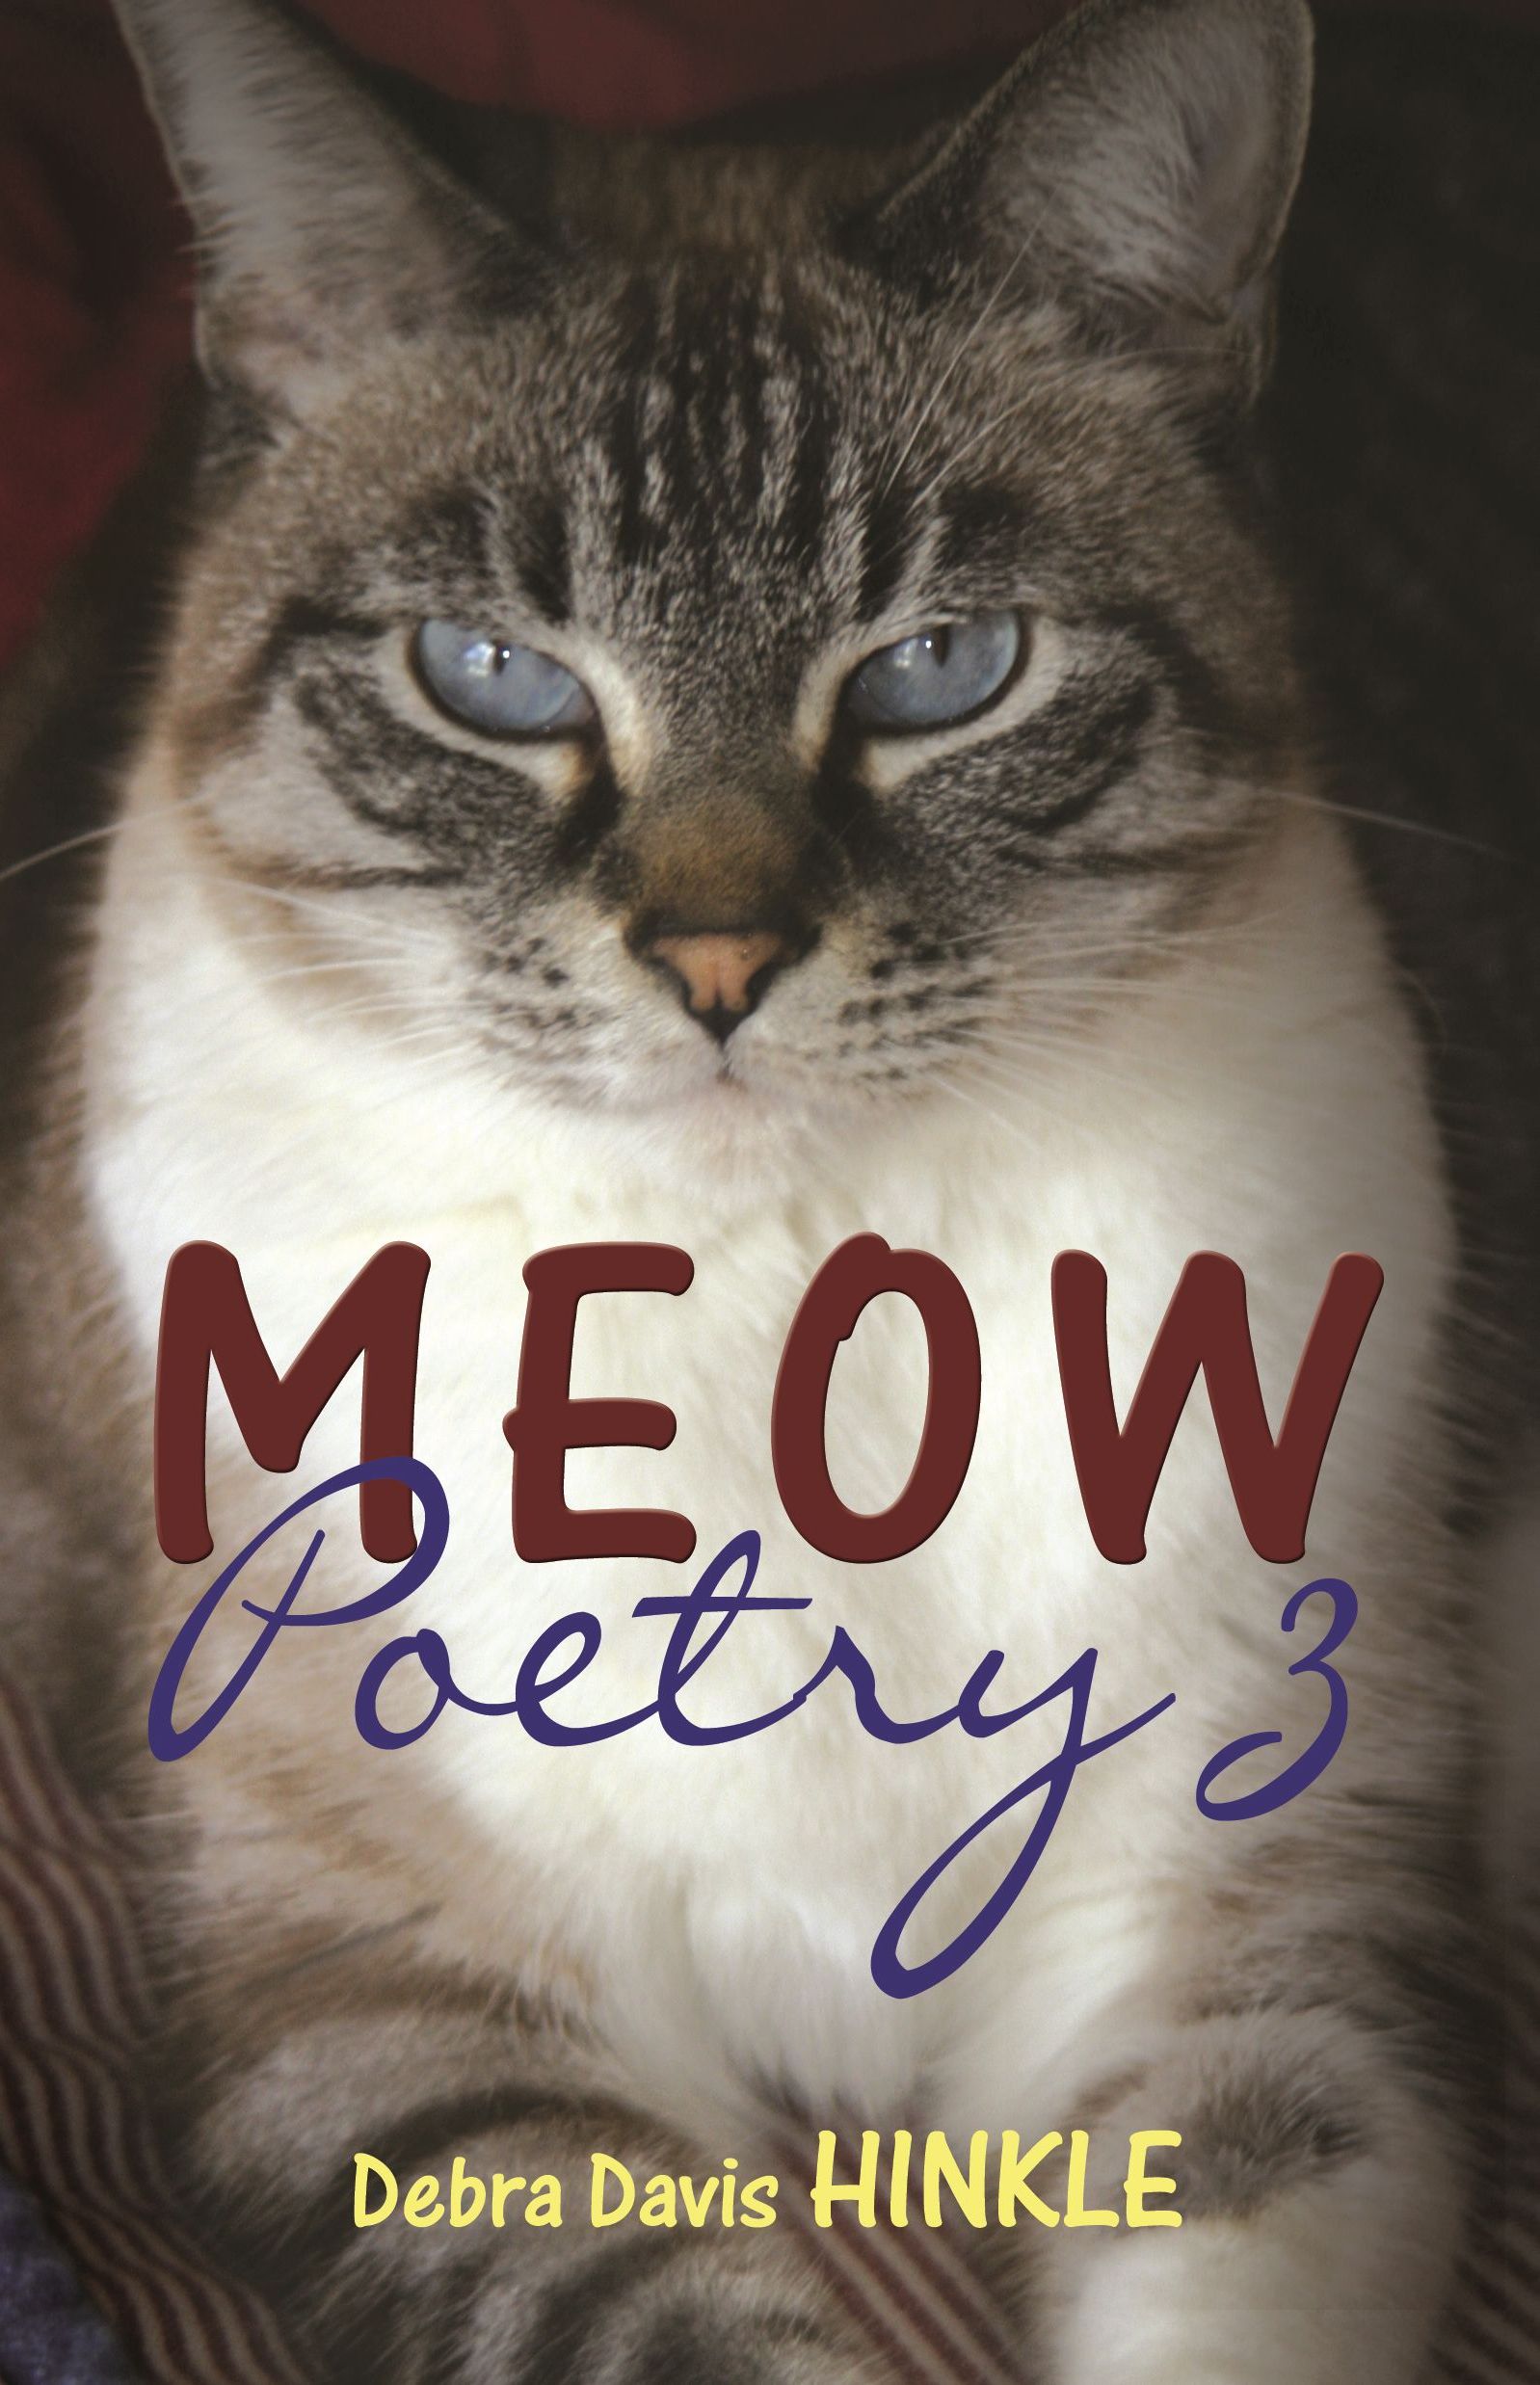 Meow Poetry 3